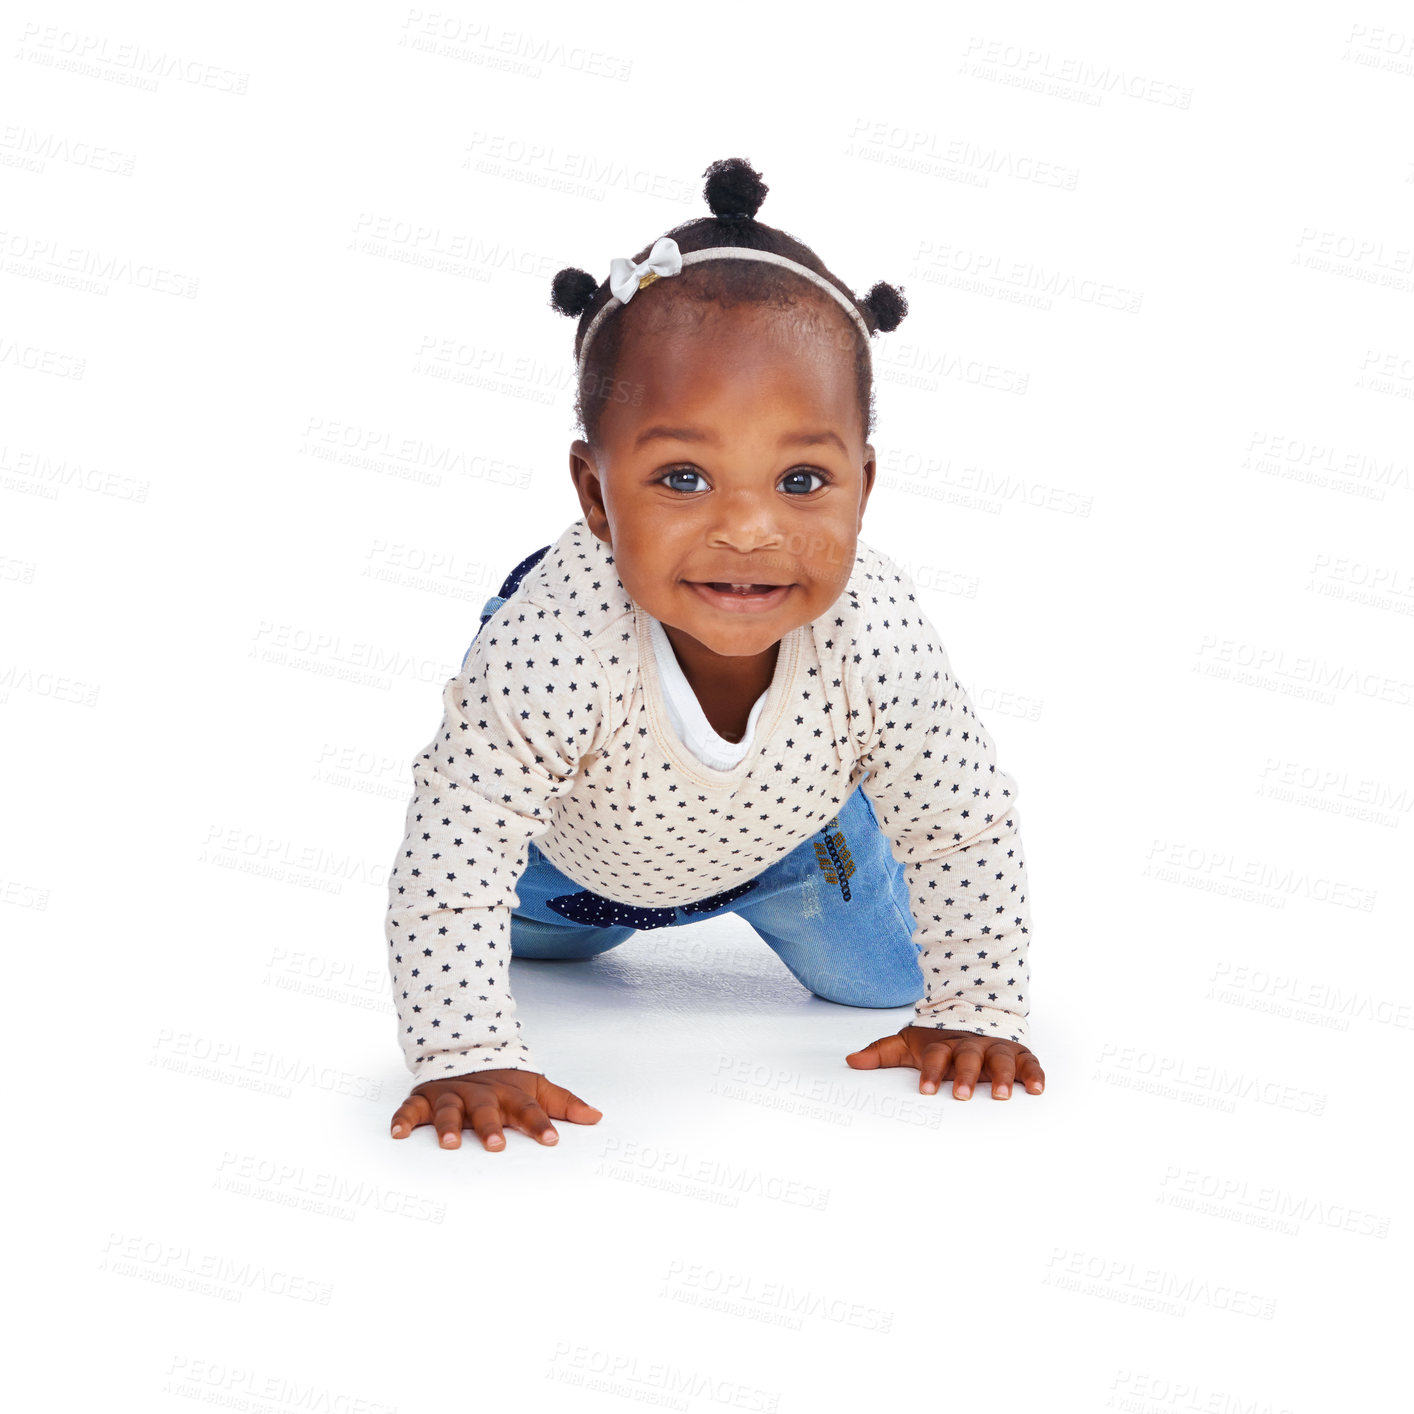 Buy stock photo Portrait, baby girl or smile to crawl, explore or child development on mock up on white background. Female toddler or crawling on hands, knees or learn to balance mobility milestone and motor skills